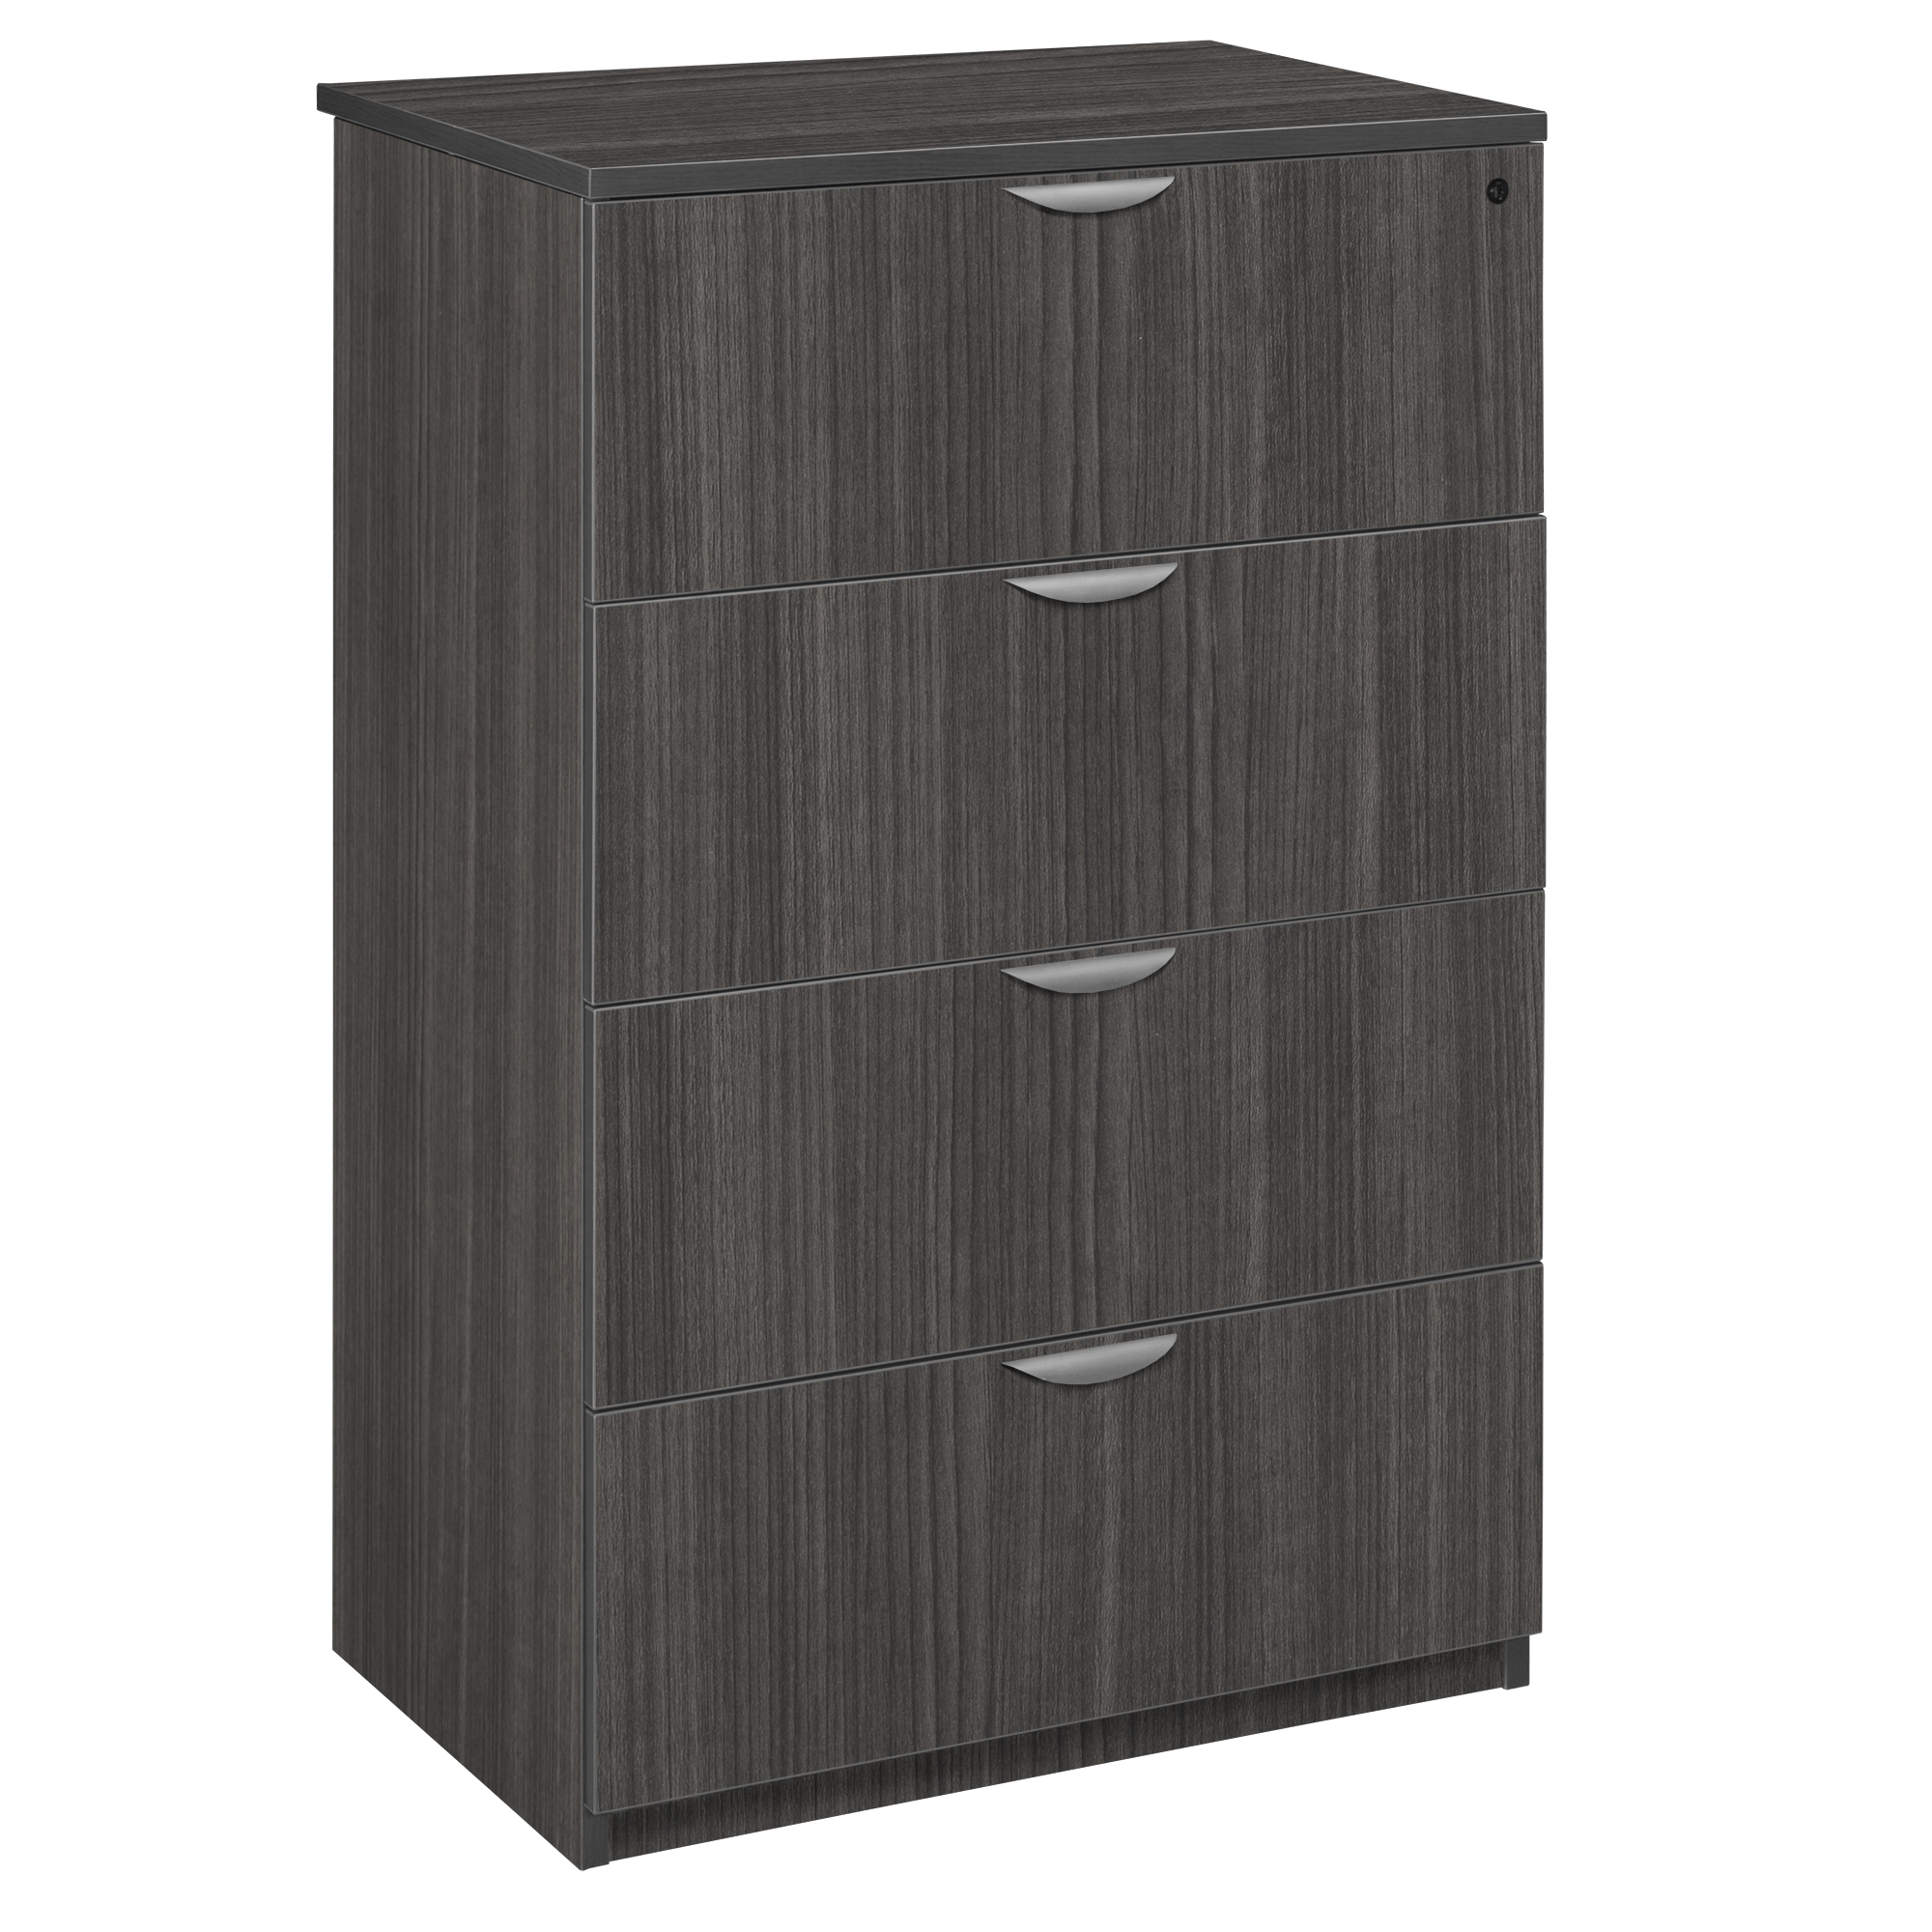 Legacy 4-Drawer Lateral File- Ash Grey - image 1 of 8